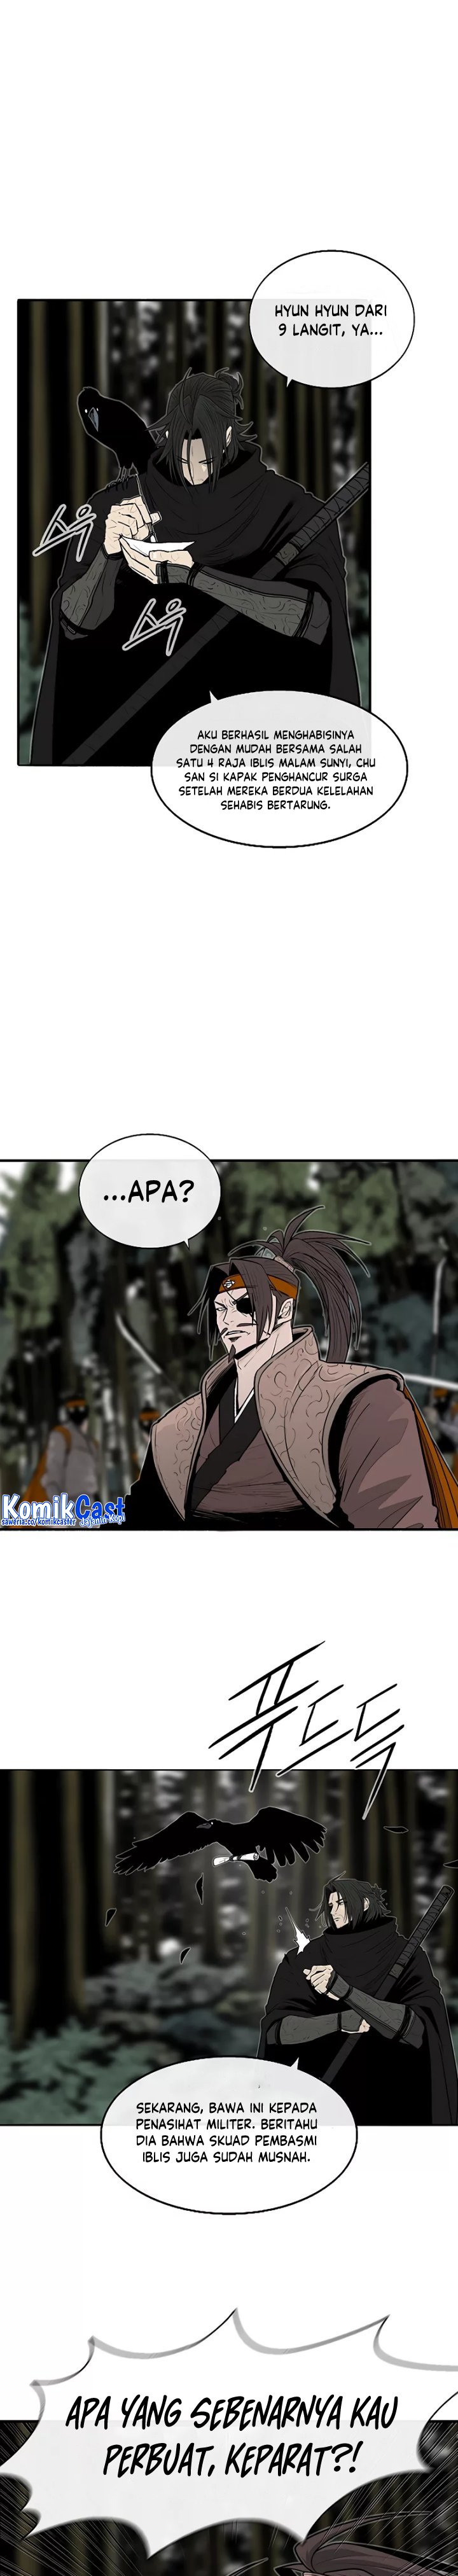 Legend Of The Northern Blade Chapter 167